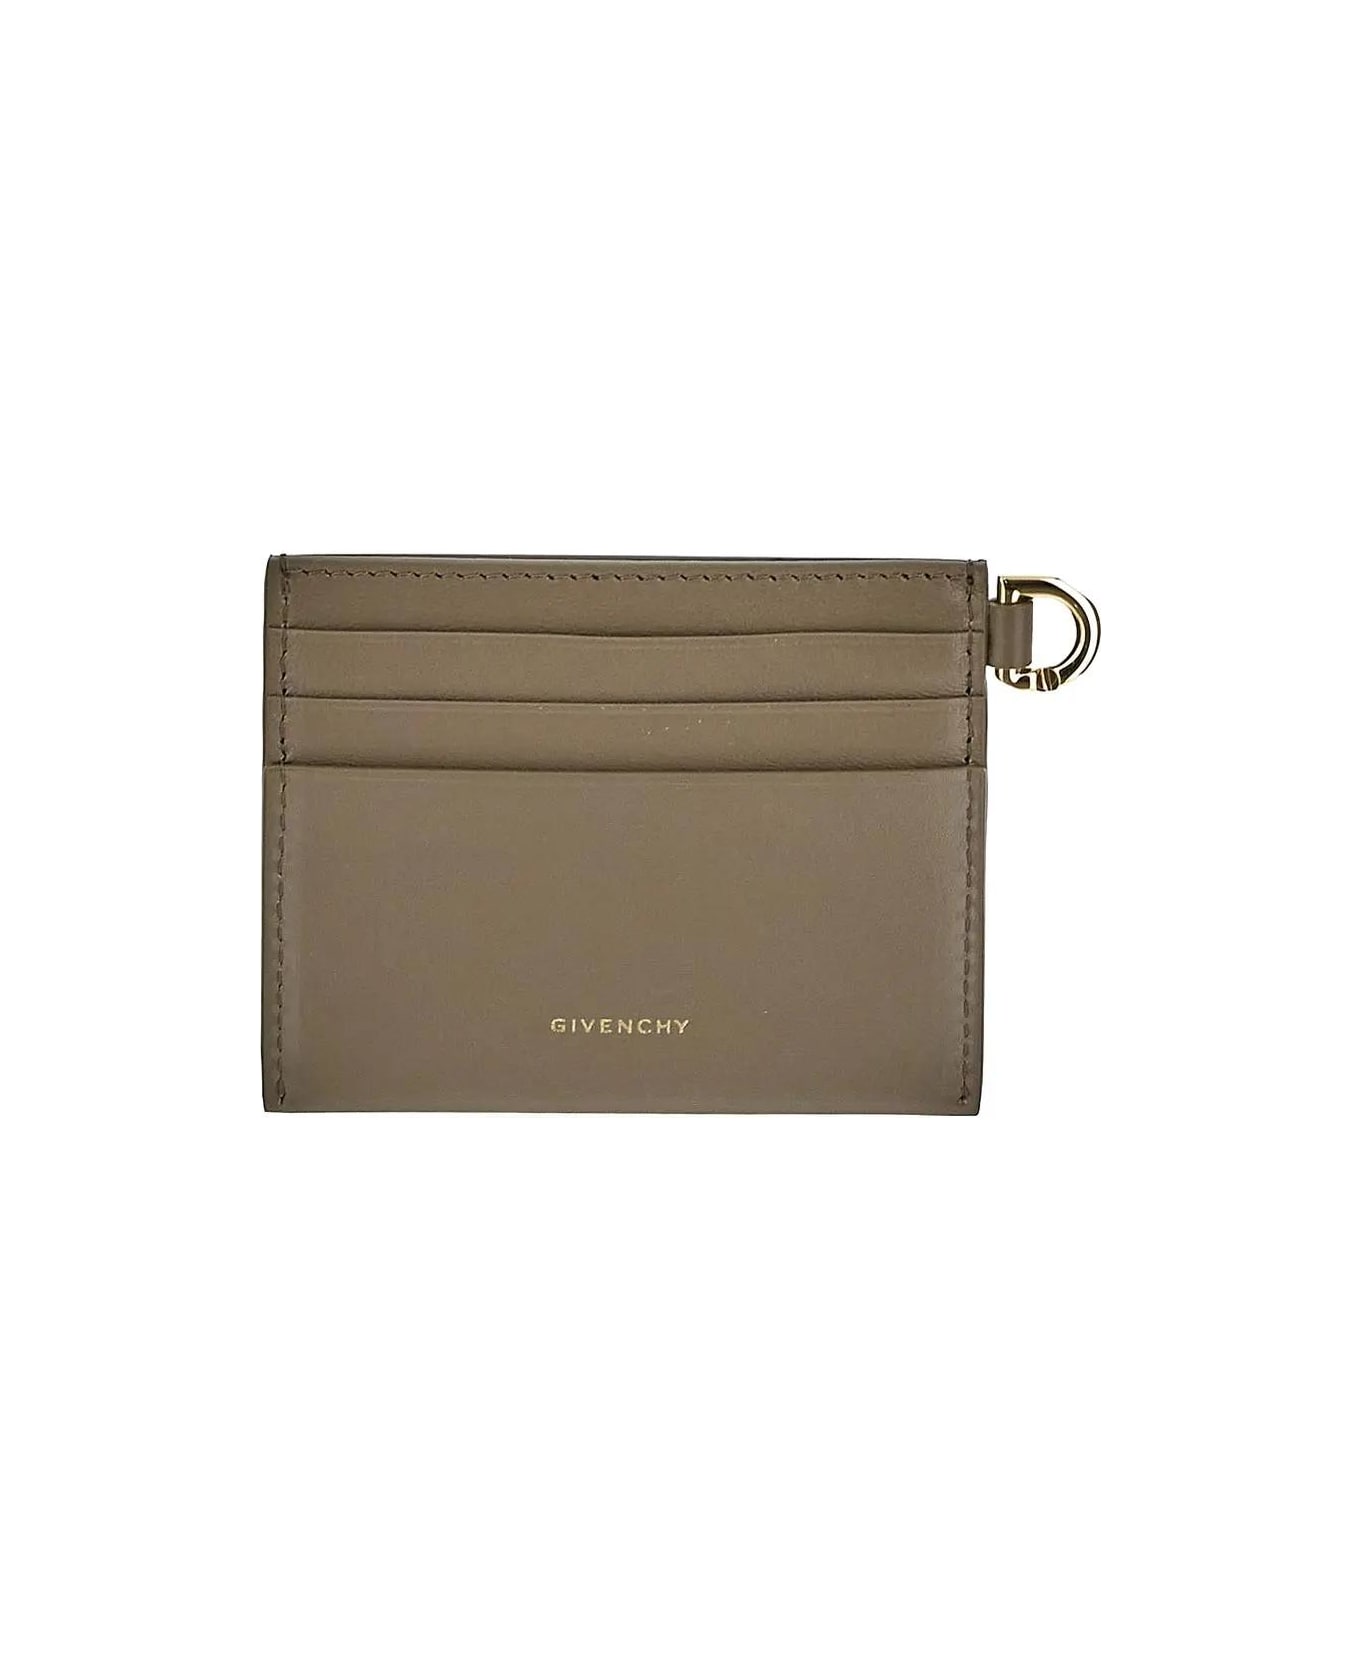 Givenchy 2x3cc Wallet - Brown